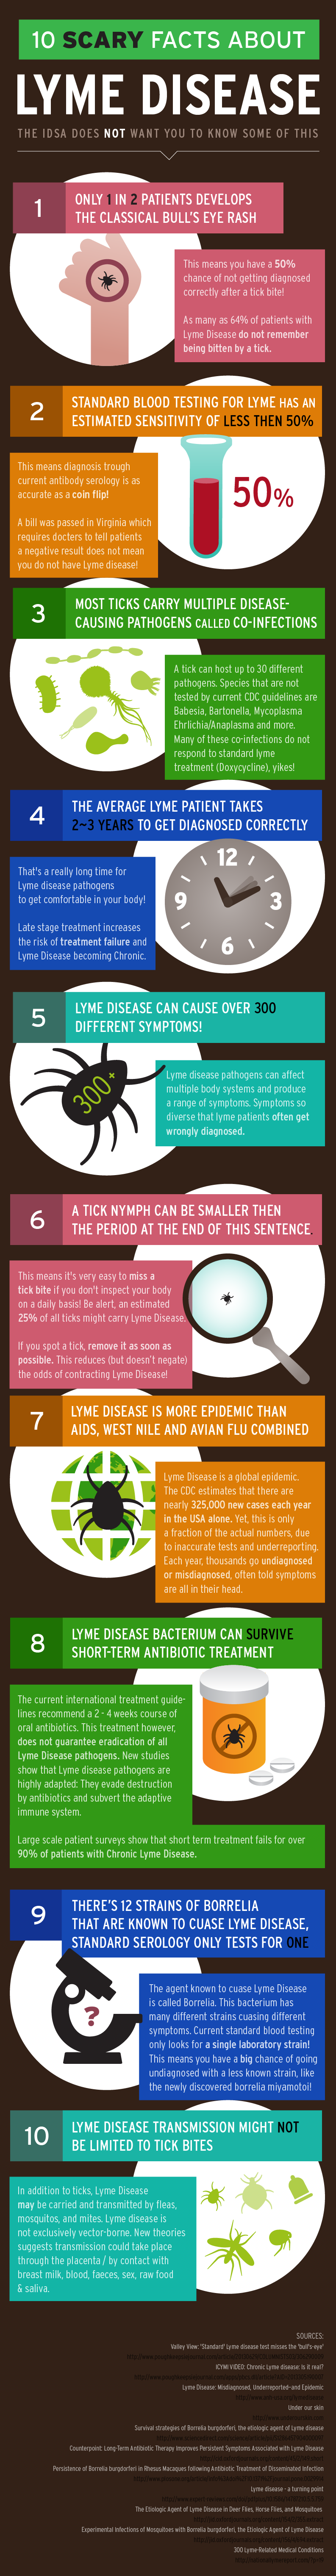 Few creepy facts about the Lyme disease